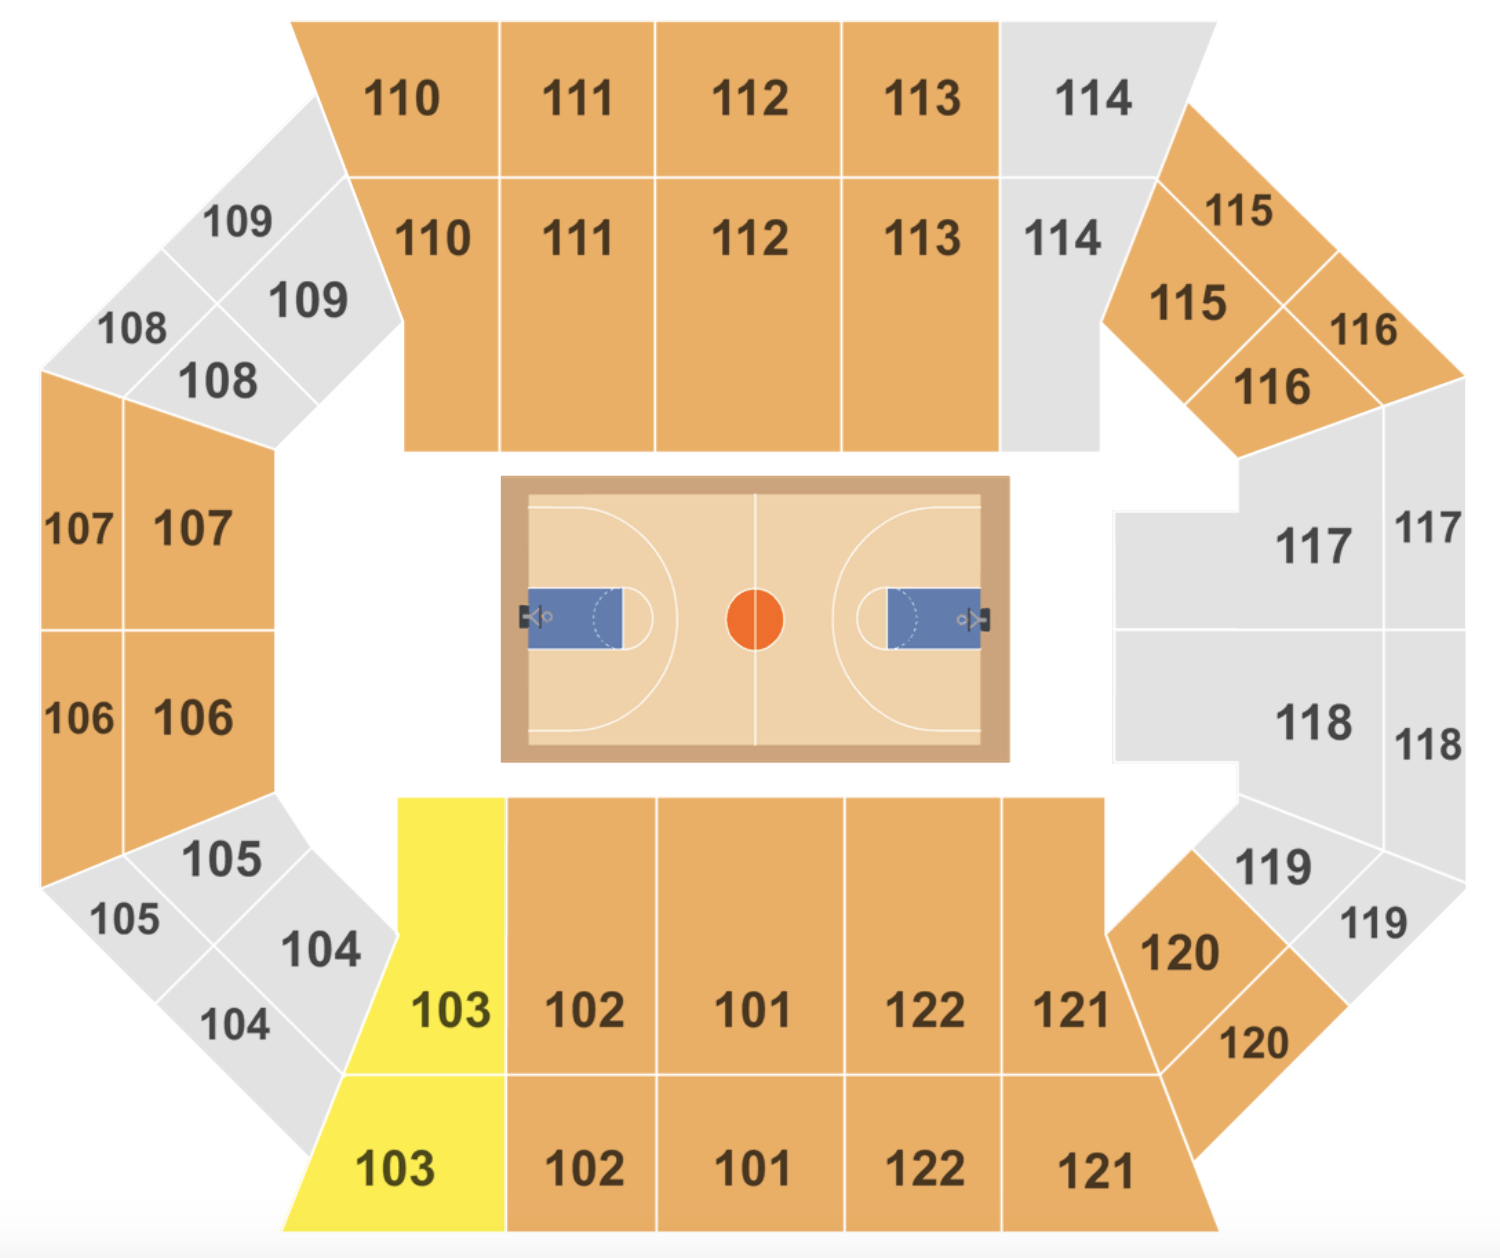 How To Find The Cheapest Miami Basketball Tickets + Face Value Options